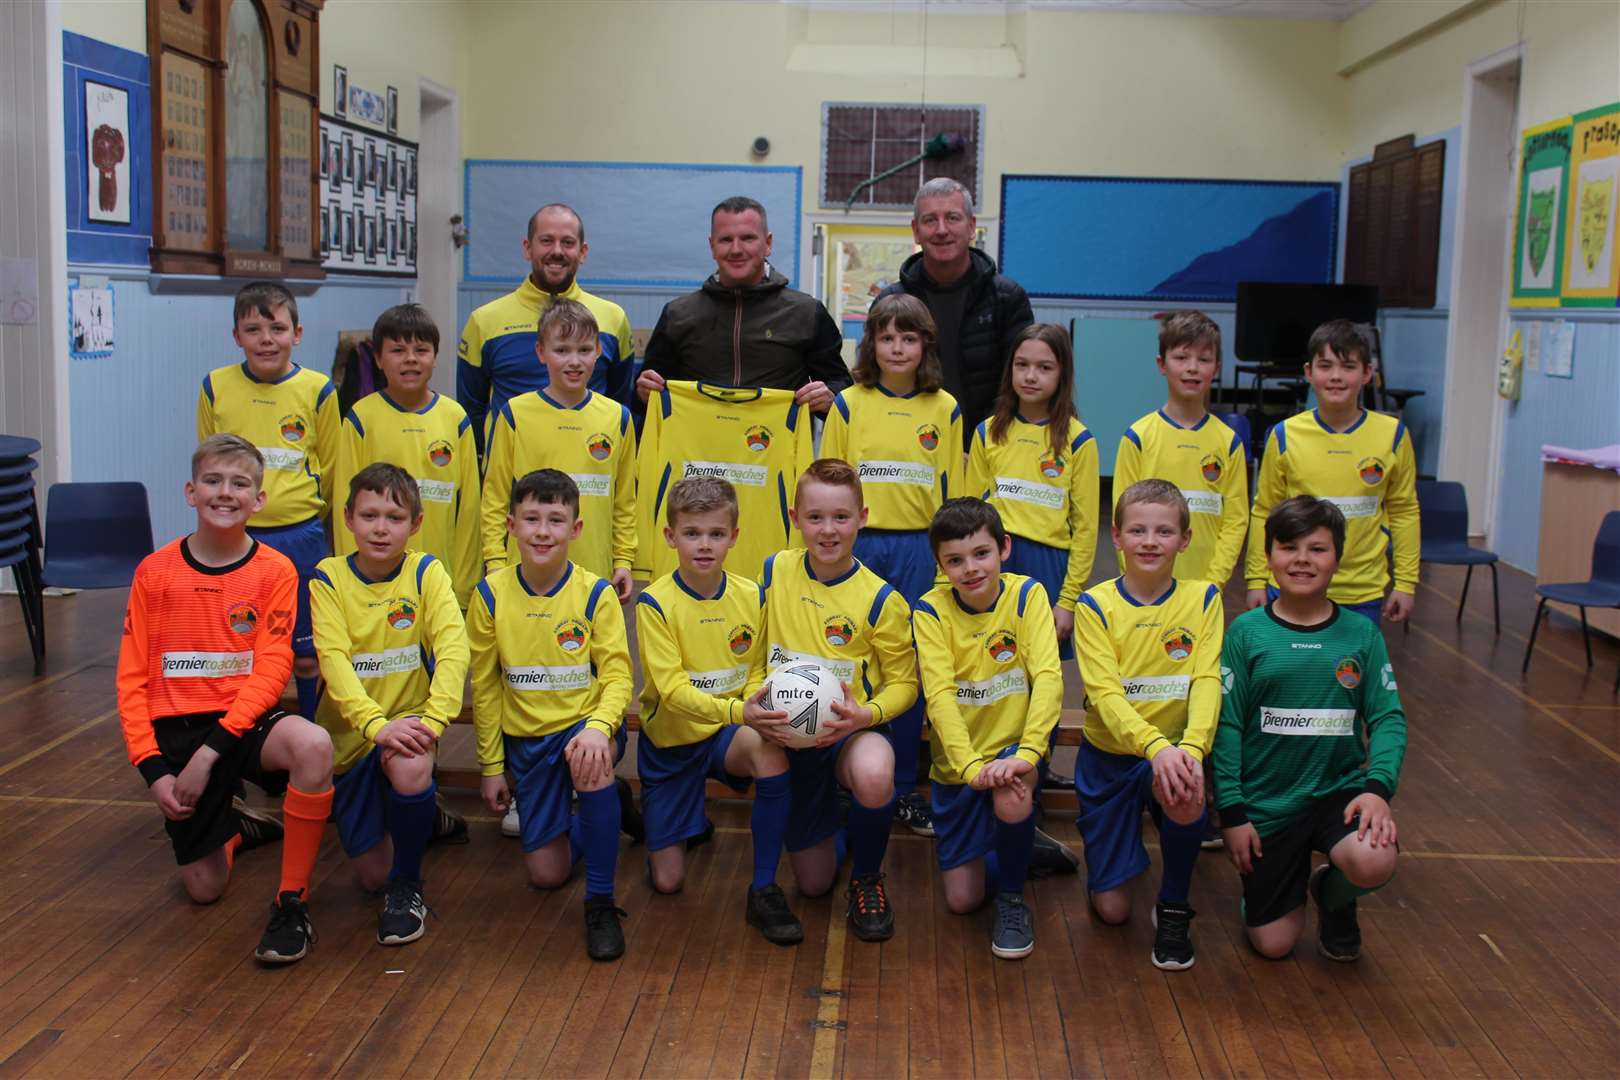 Kemnay Primary School pupils show off their new kits, with head teacher David Williams, Premier Coaches' managing director Alan Findlater and Premier Coaches' business manager David McDonald . Picture: Kirsty Brown